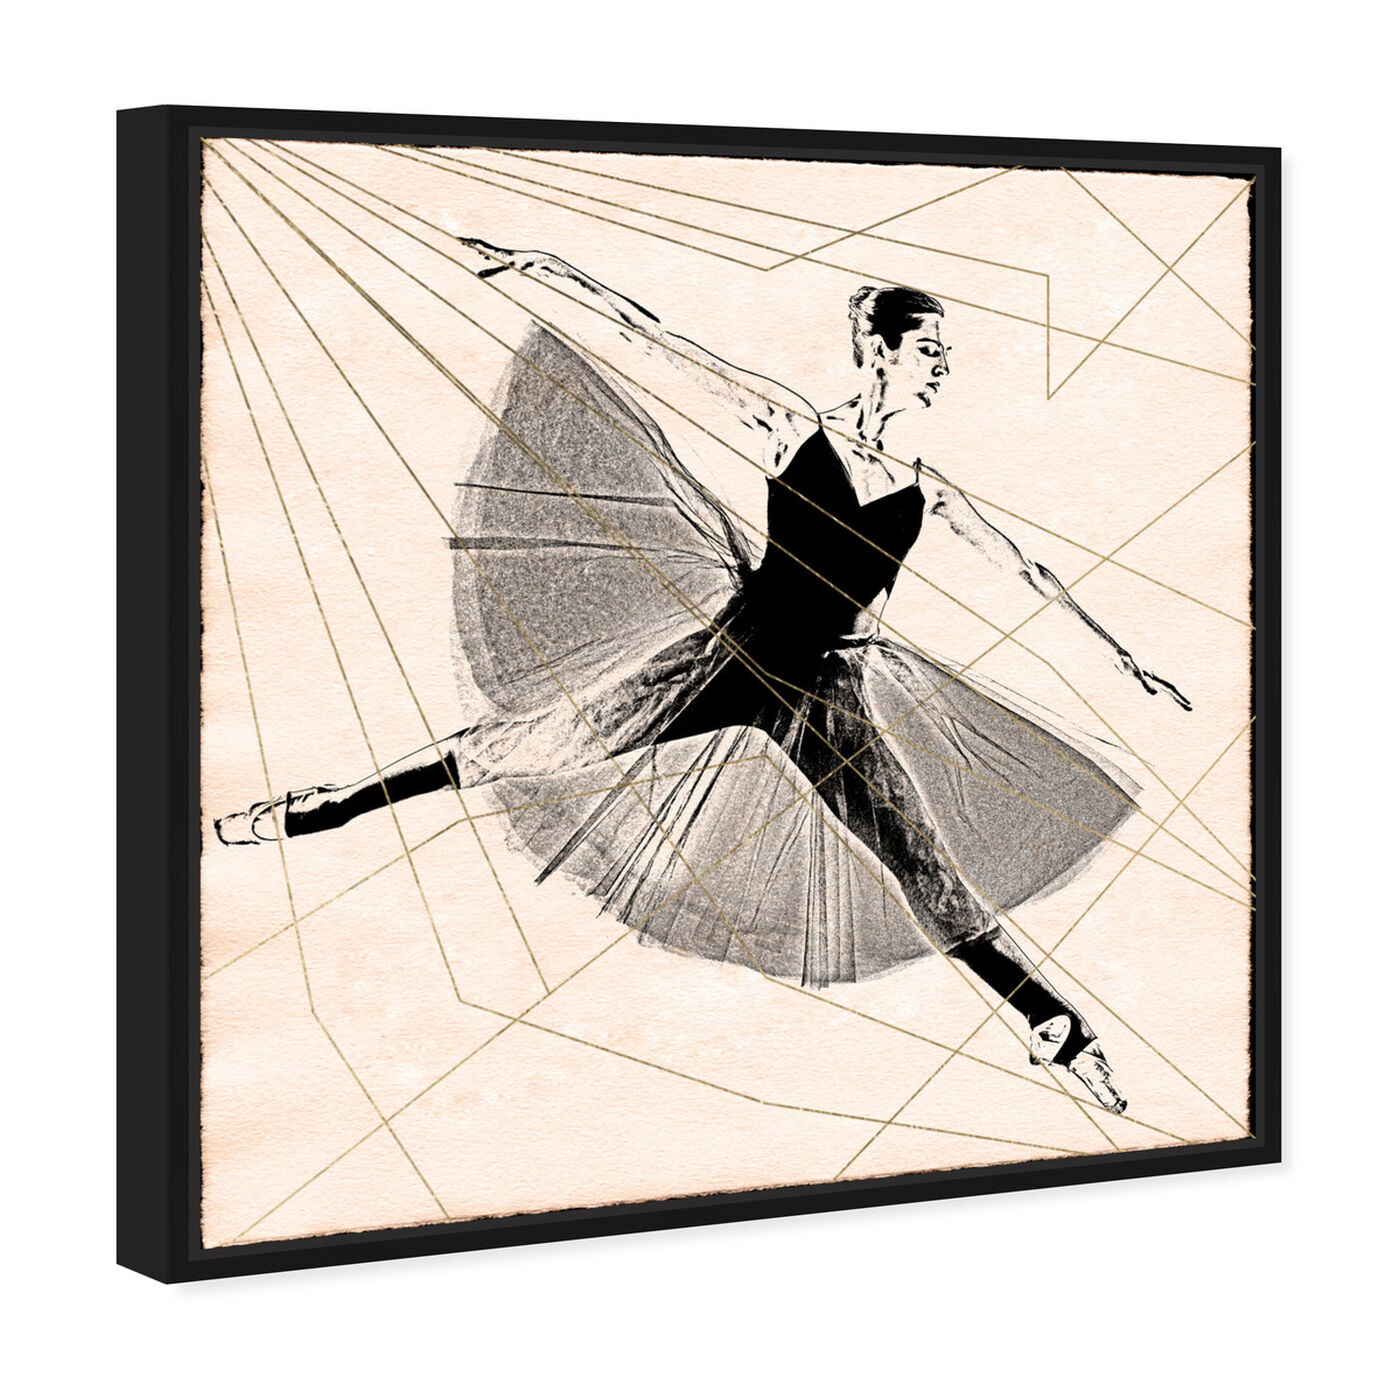 Angled view of Ballet I Print featuring sports and teams and ballet art.